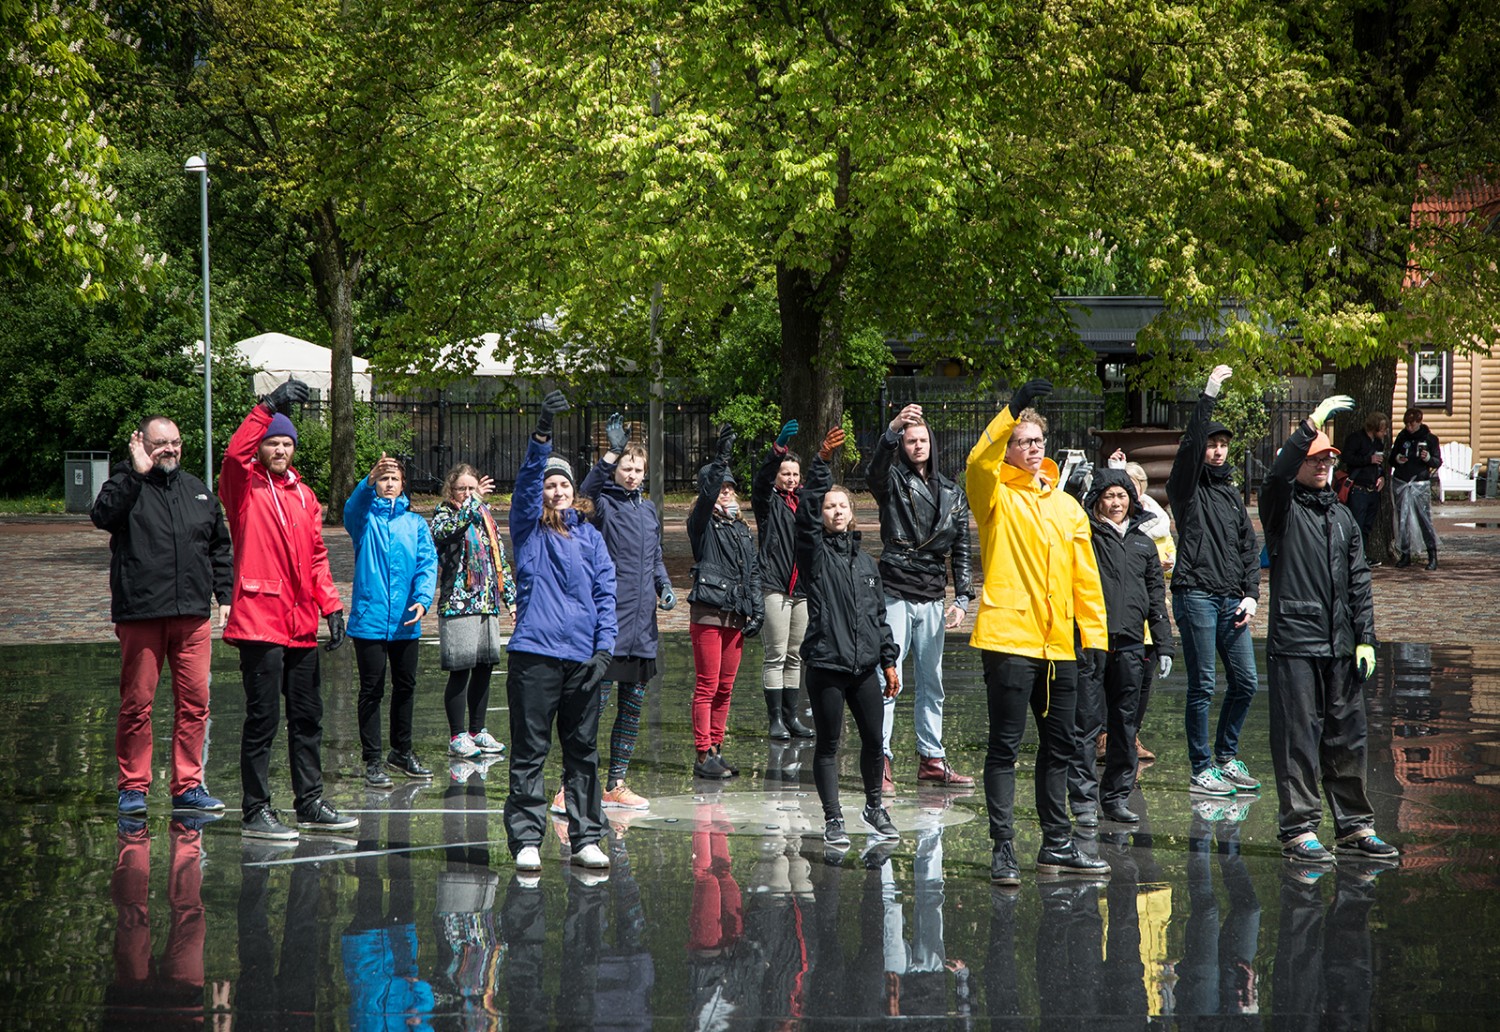 A group of peole in raincoats with their right arm raised.